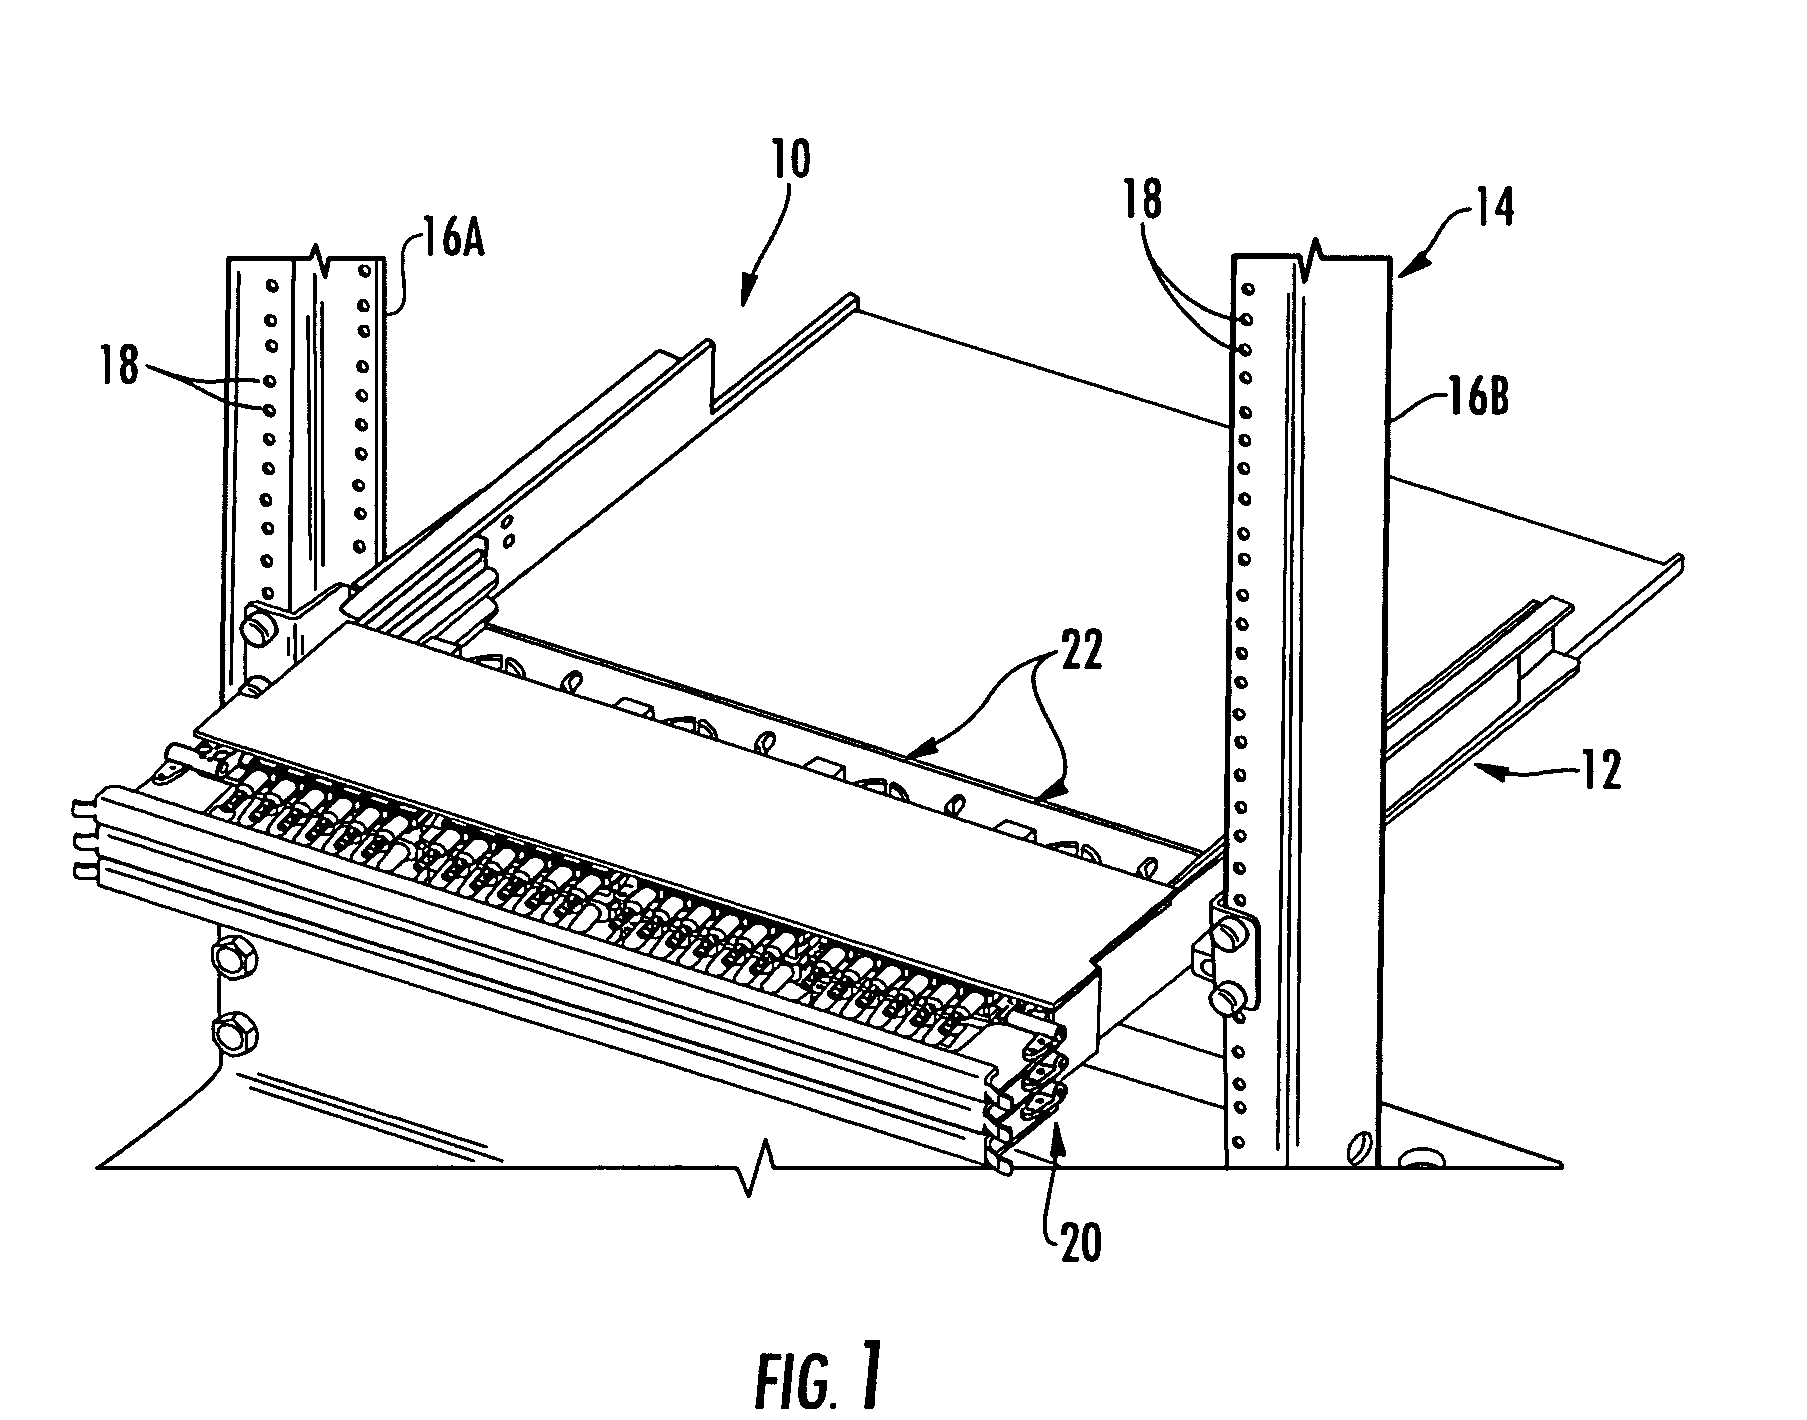 Rear-slidable extension in a fiber optic equipment tray